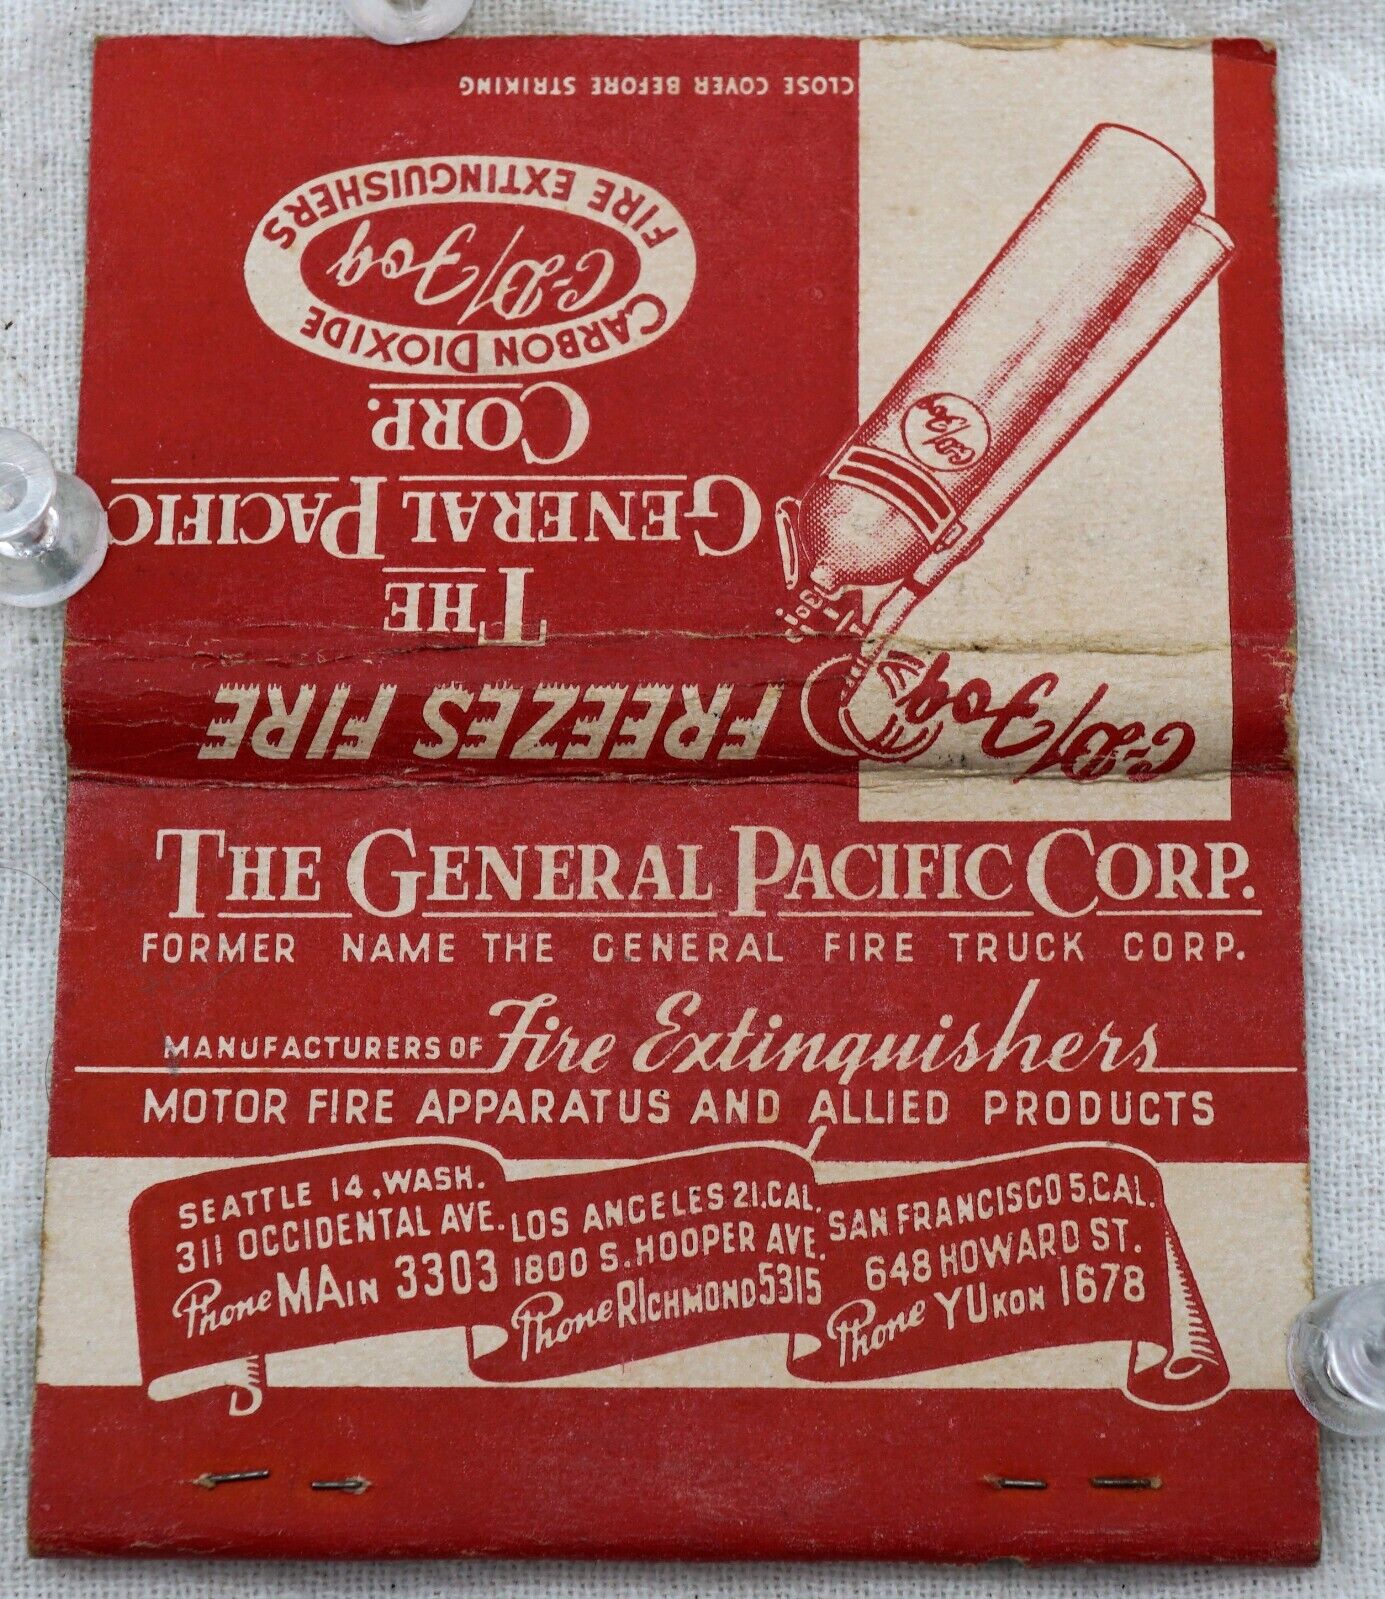 Matchbook Cover The General Pacific Corp. Carbon Dioxide Fire Extinguishers